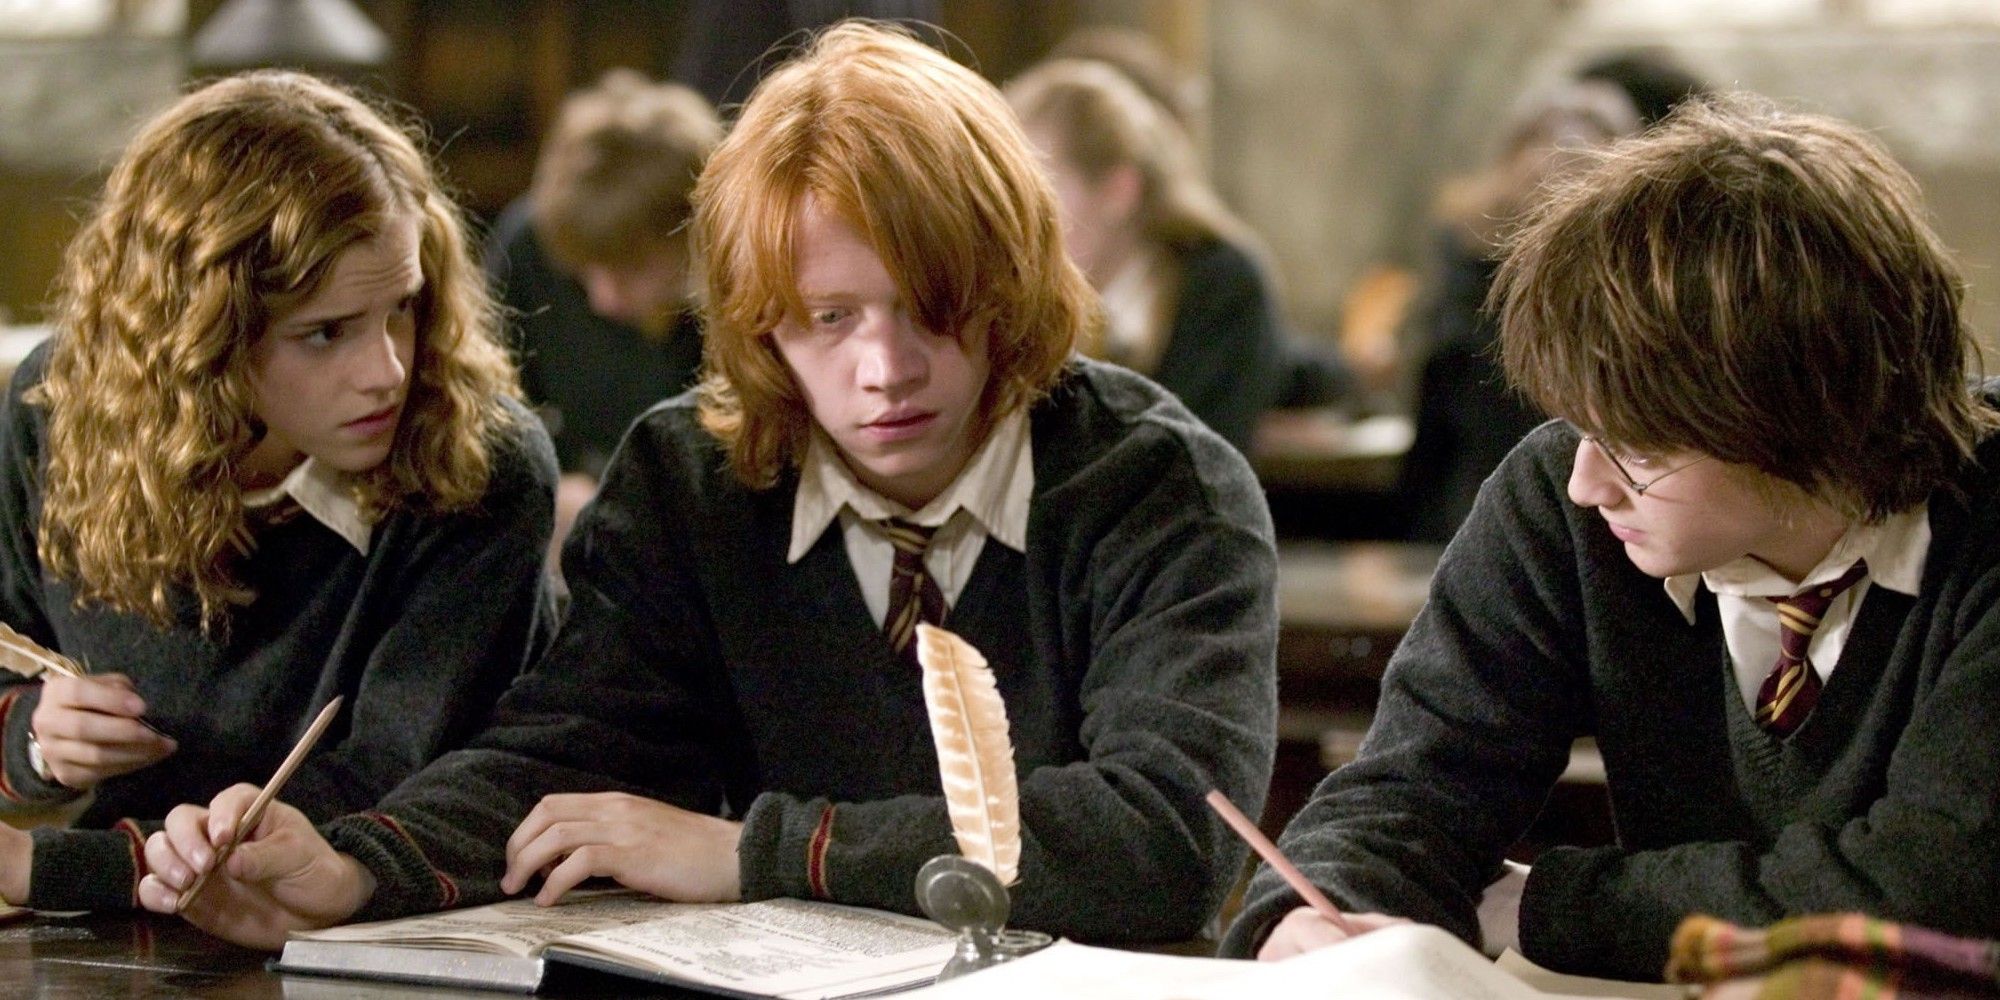 Emma Watson as Hermione, Rupert Grint as Ron, and Daniel Radcliffe as Harry, History of Magic